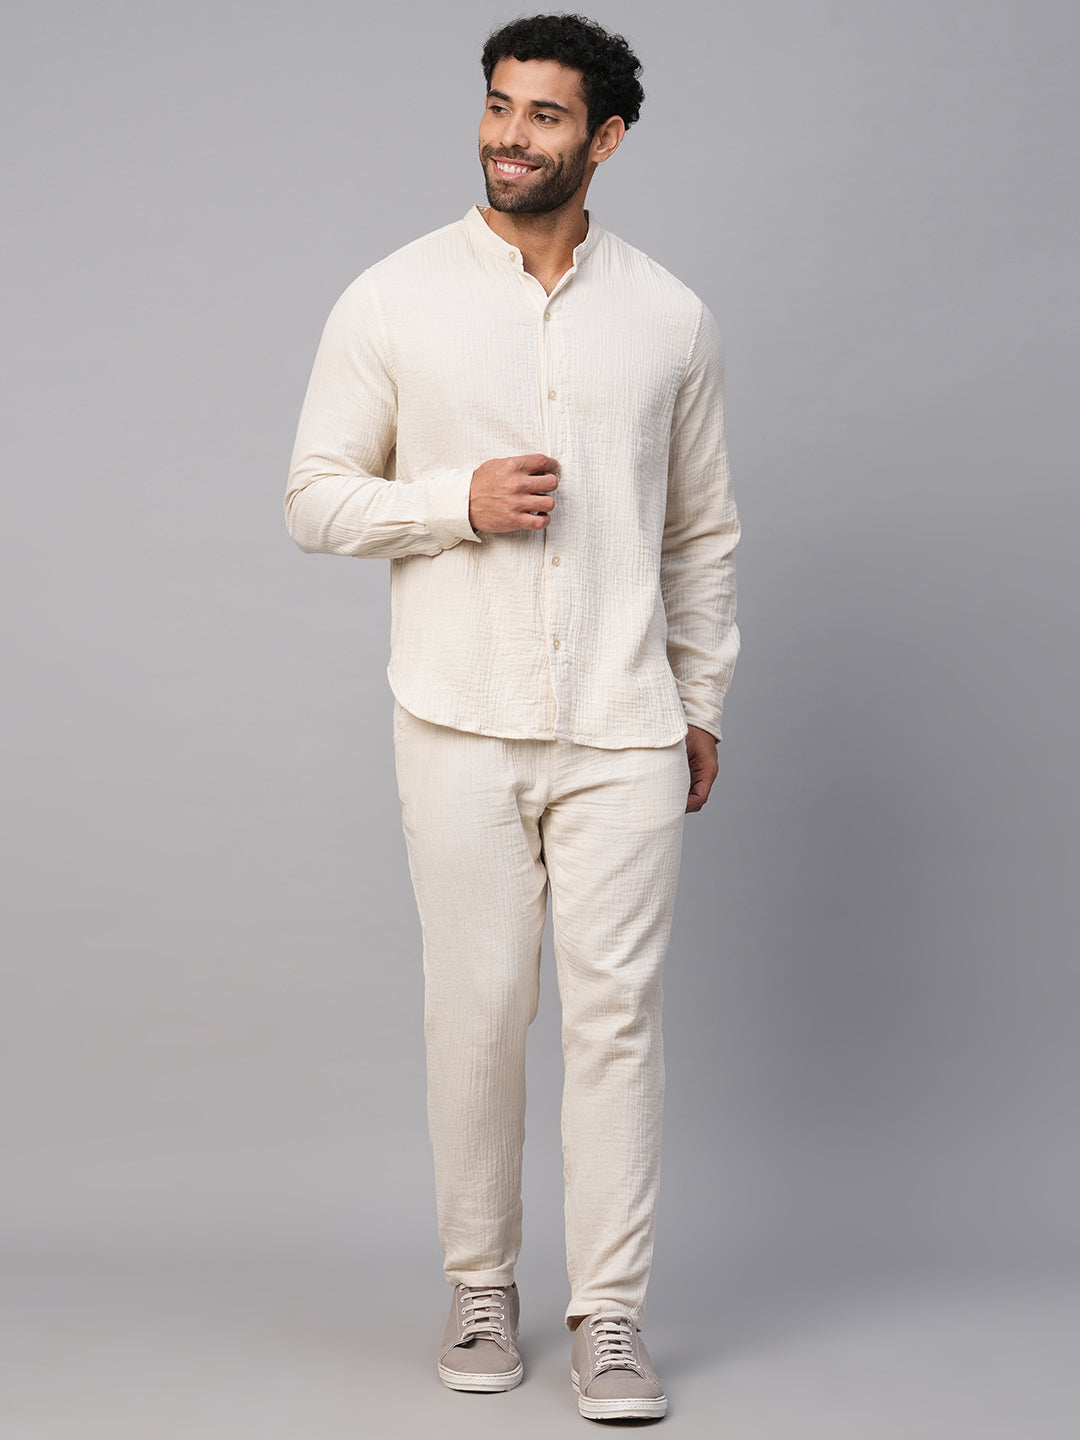 Buy White Cotton Shirt and Off-White Pant Co-ord Set Online at